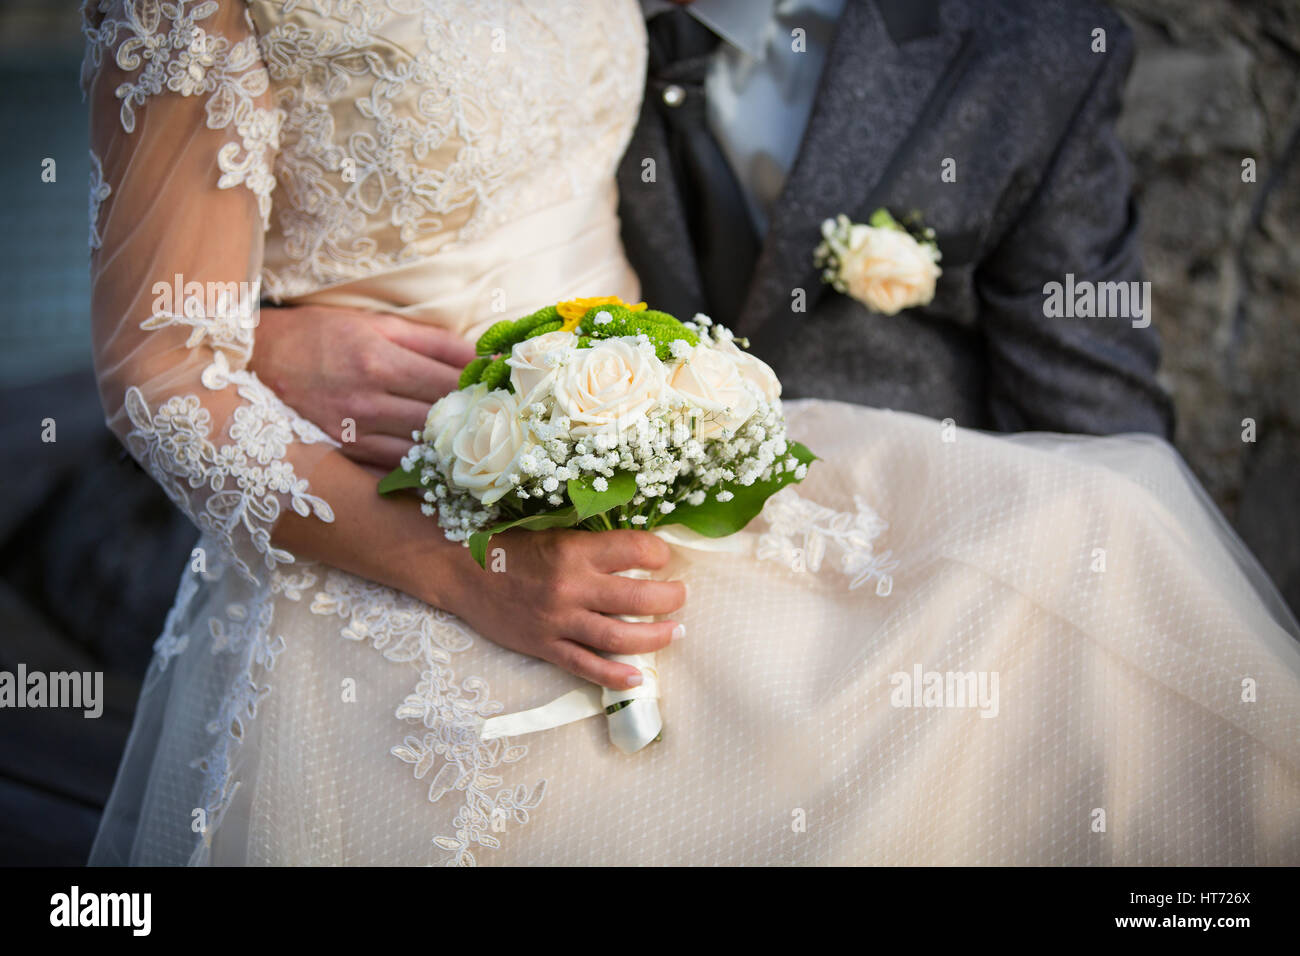 Bride with bouquet in a Wedding Day Stock Photo